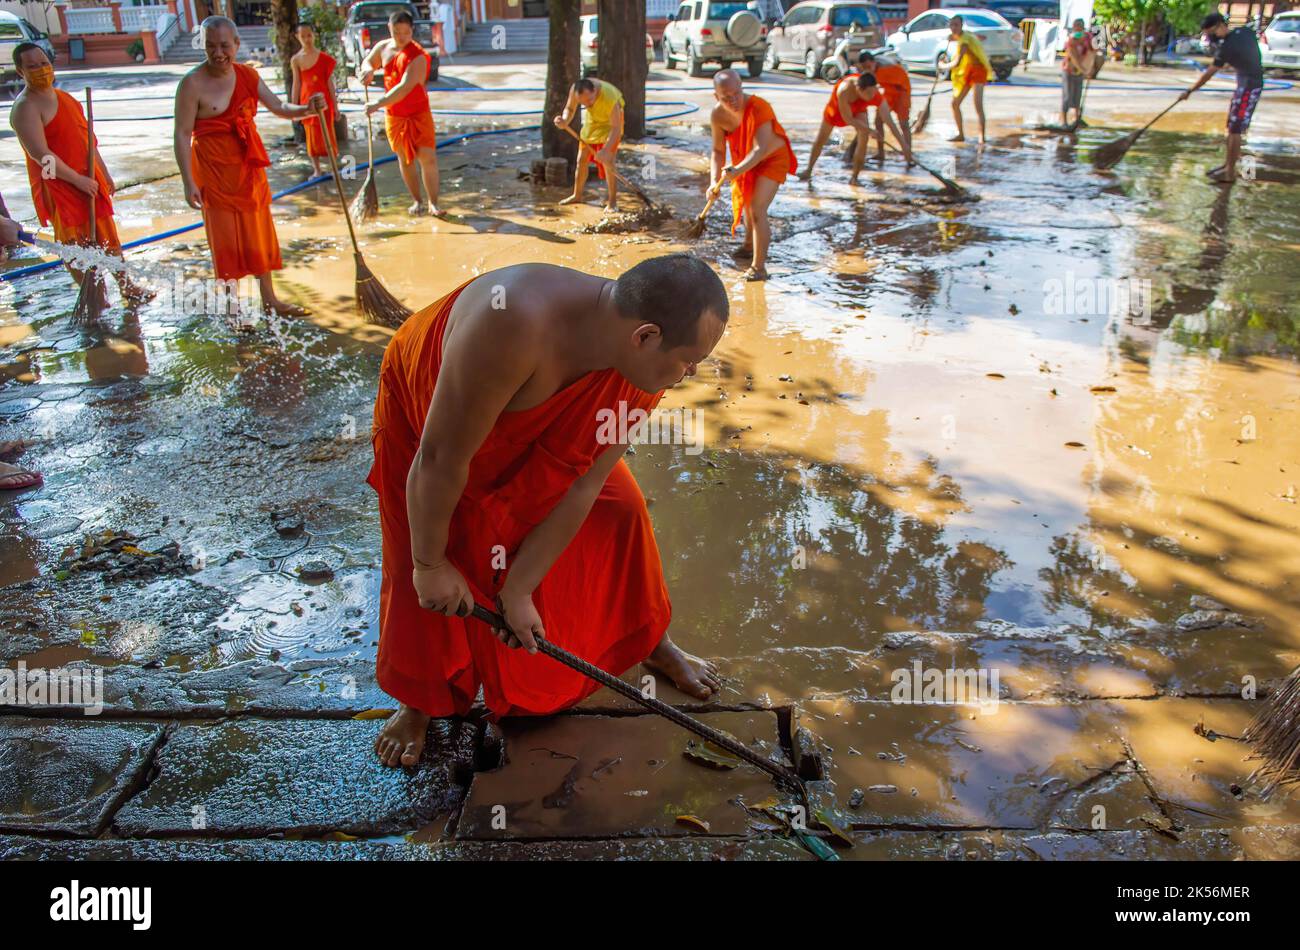 Monks clean up a temple in Chiang Mai's Muang district during the aftermath. The flood situation at Chiang Mai in the northern part of Thailand comes to an ease with decreasing water levels. The floods damaged commercial areas, the Chang Khlan Road and the Night Bazaar. (Photo by Pongmanat Tasiri / SOPA Images/Sipa USA) Stock Photo